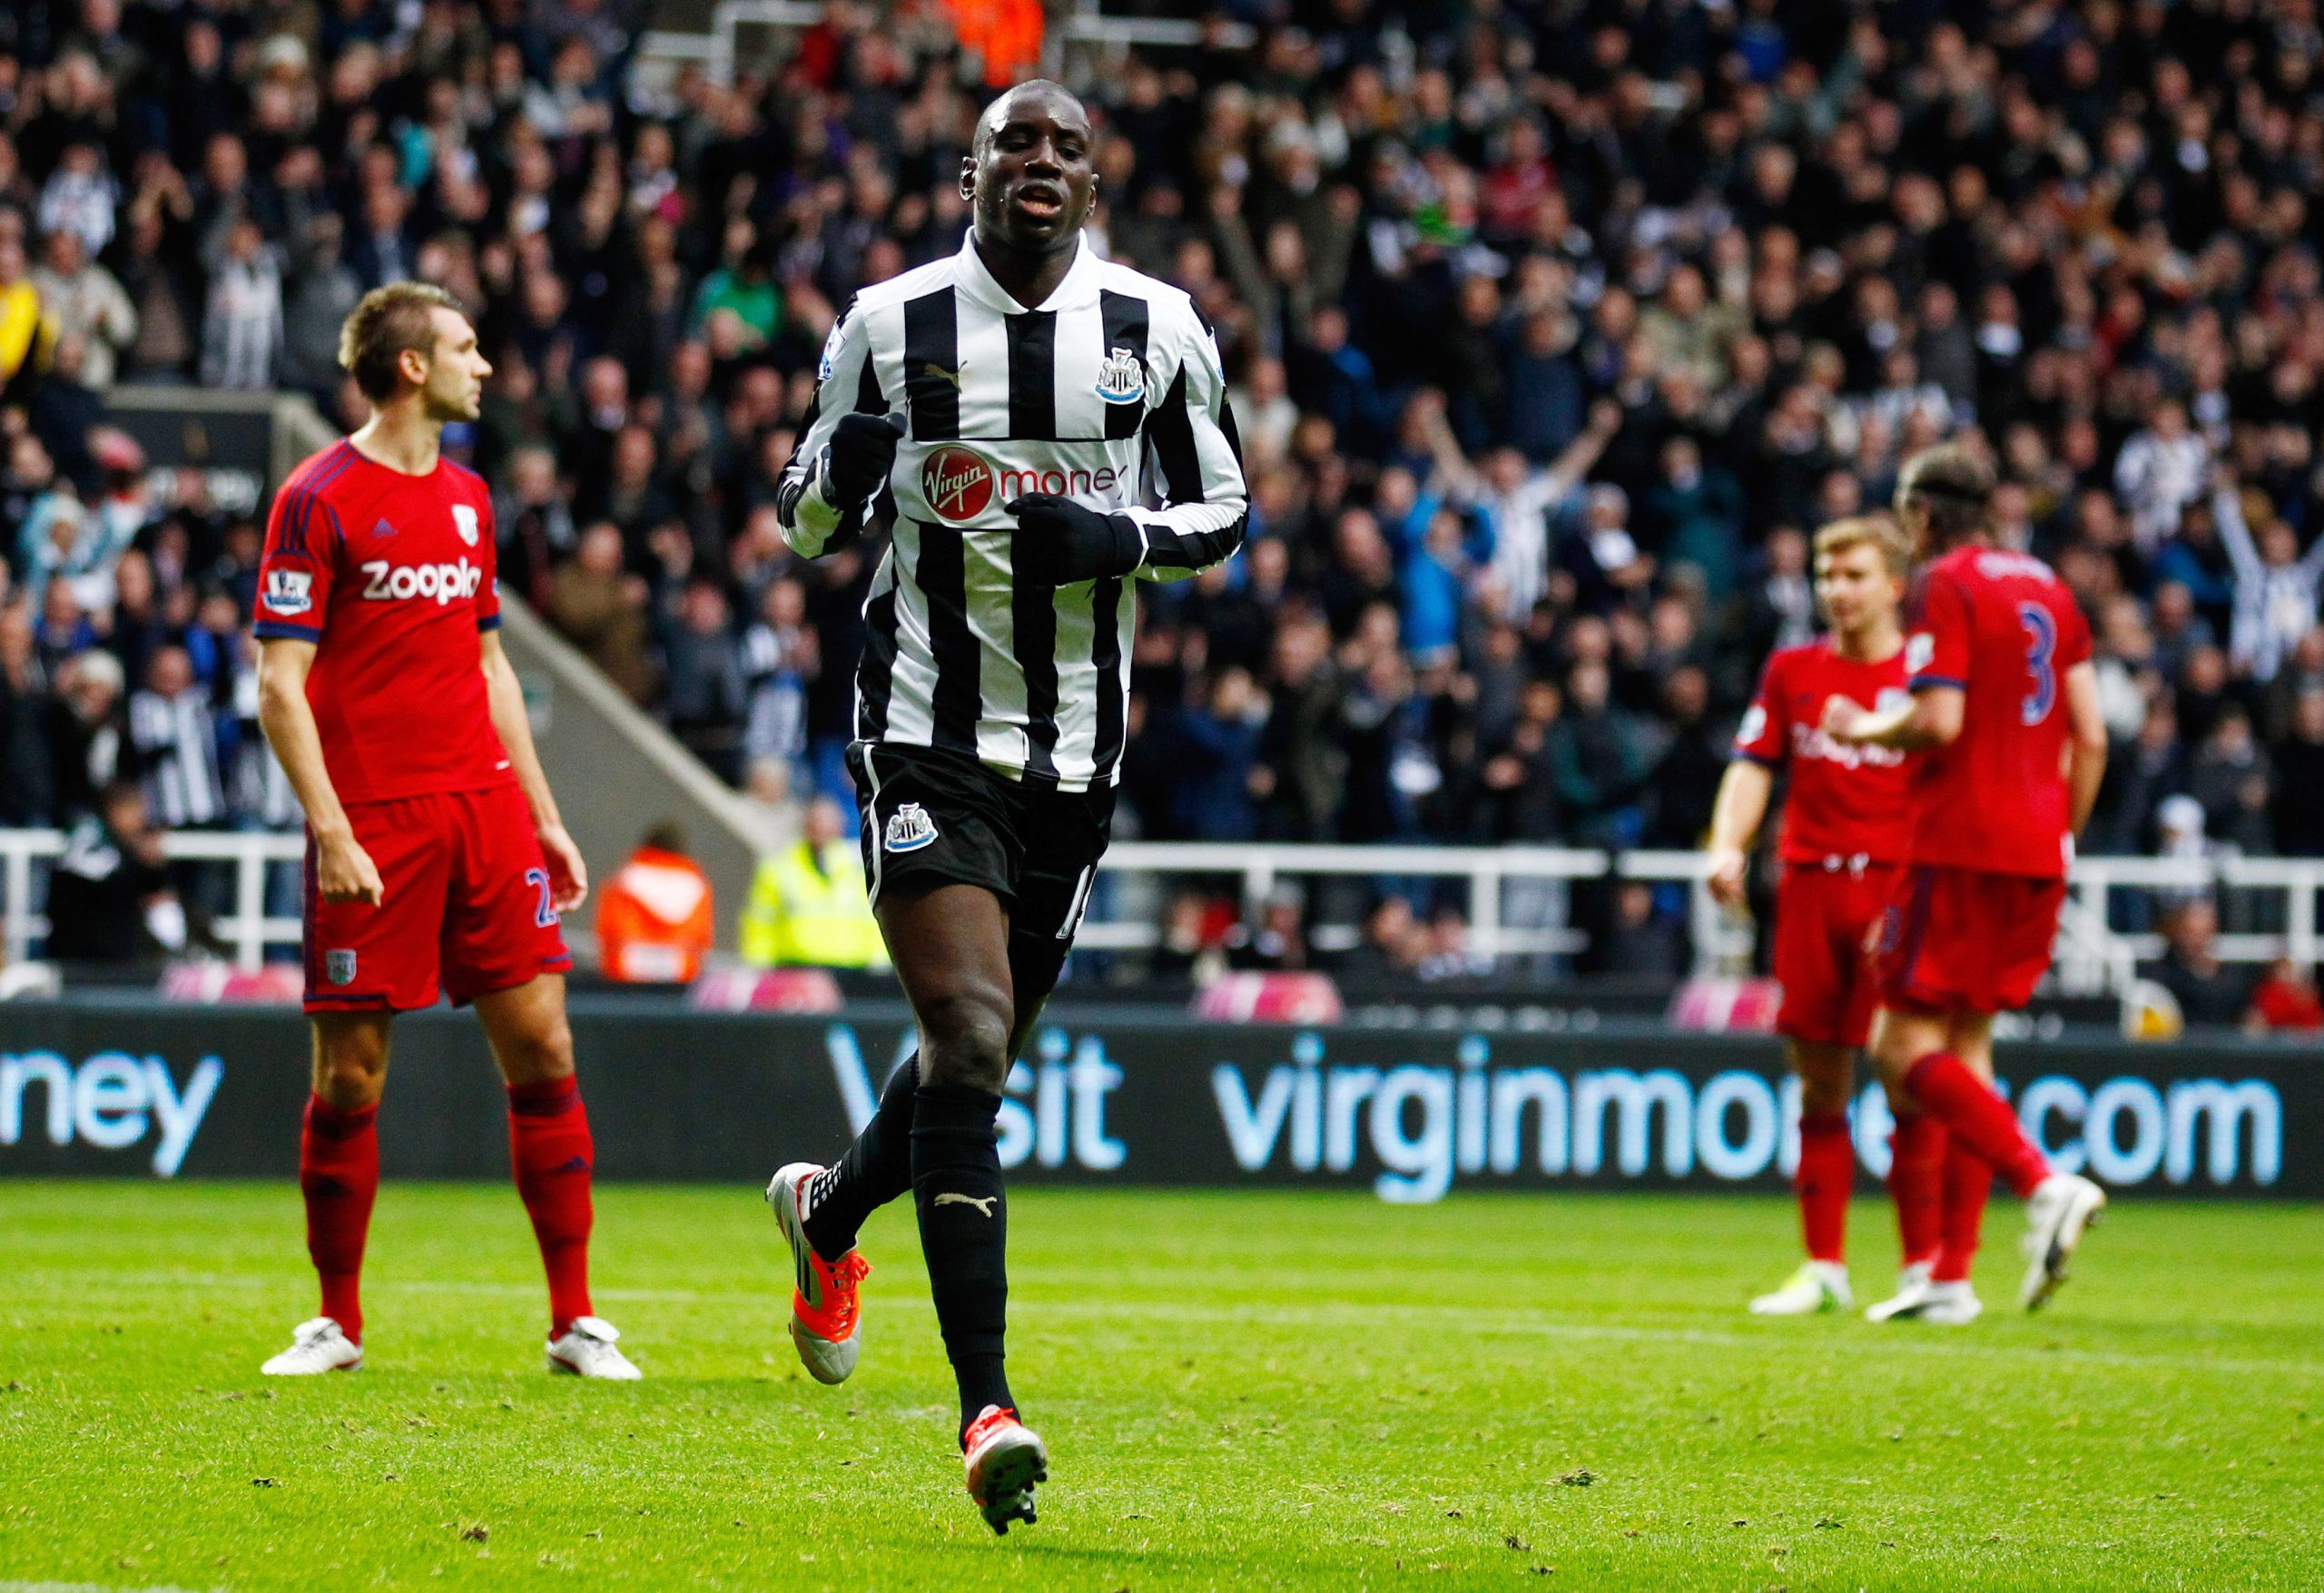 Football - Newcastle United v West Bromwich Albion - Barclays Premier League  - St James' Park - 28/10/12 
Newcastle United's Demba Ba celebrates scoring his sides first goal 
Mandatory Credit: Action Images / Jason Cairnduff 
Livepic 
EDITORIAL USE ONLY. No use with unauthorized audio, video, data, fixture lists, club/league logos or live services. Online in-match use limited to 45 images, no video emulation. No use in betting, games or single club/league/player publications.  Please contact yo